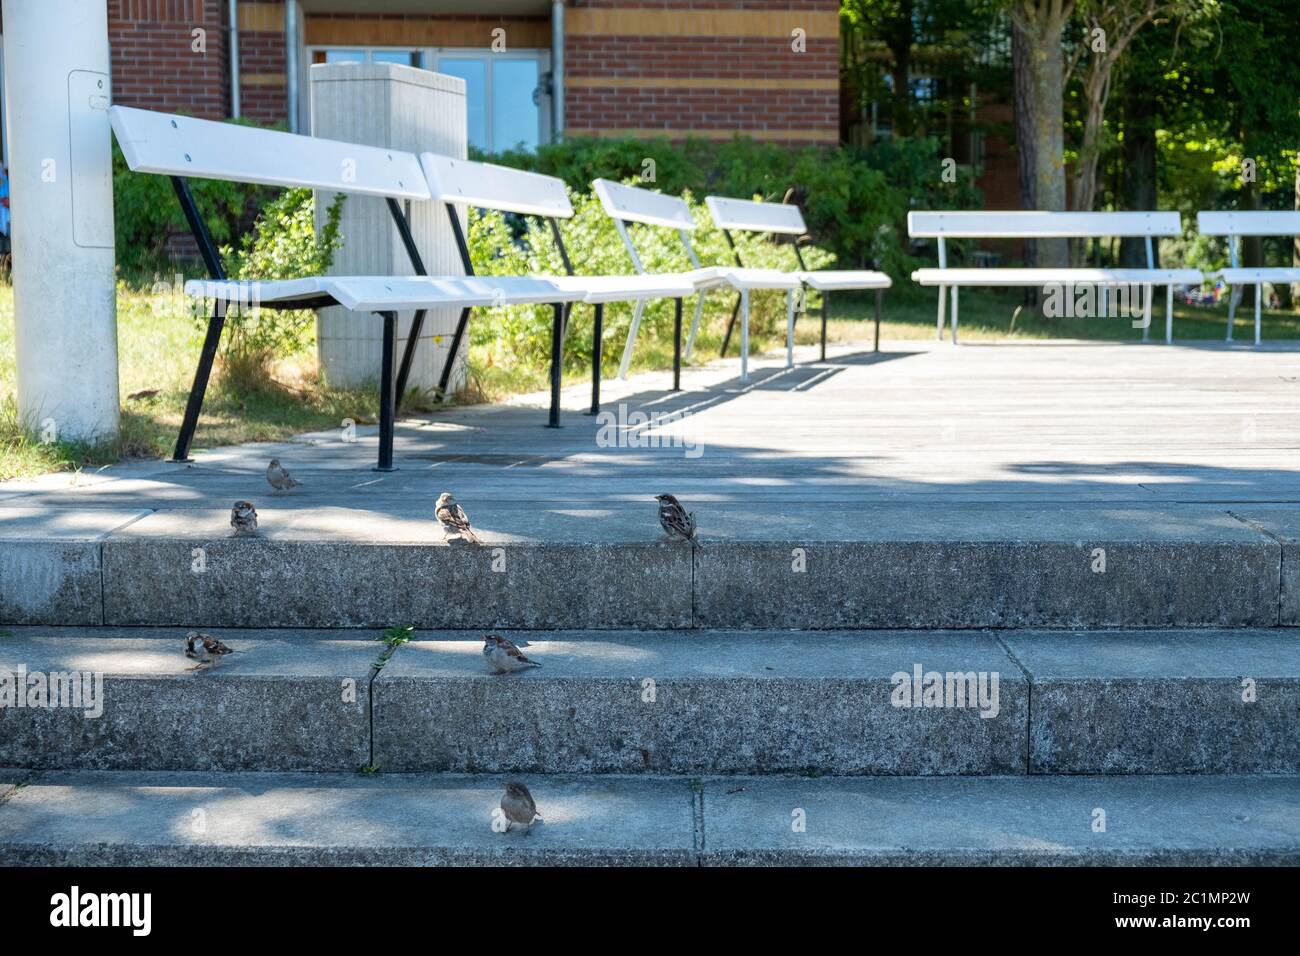 Cheeky sparrows wait for leftovers and crumbs of food from holidaymakers and wait on the park benches. Stock Photo